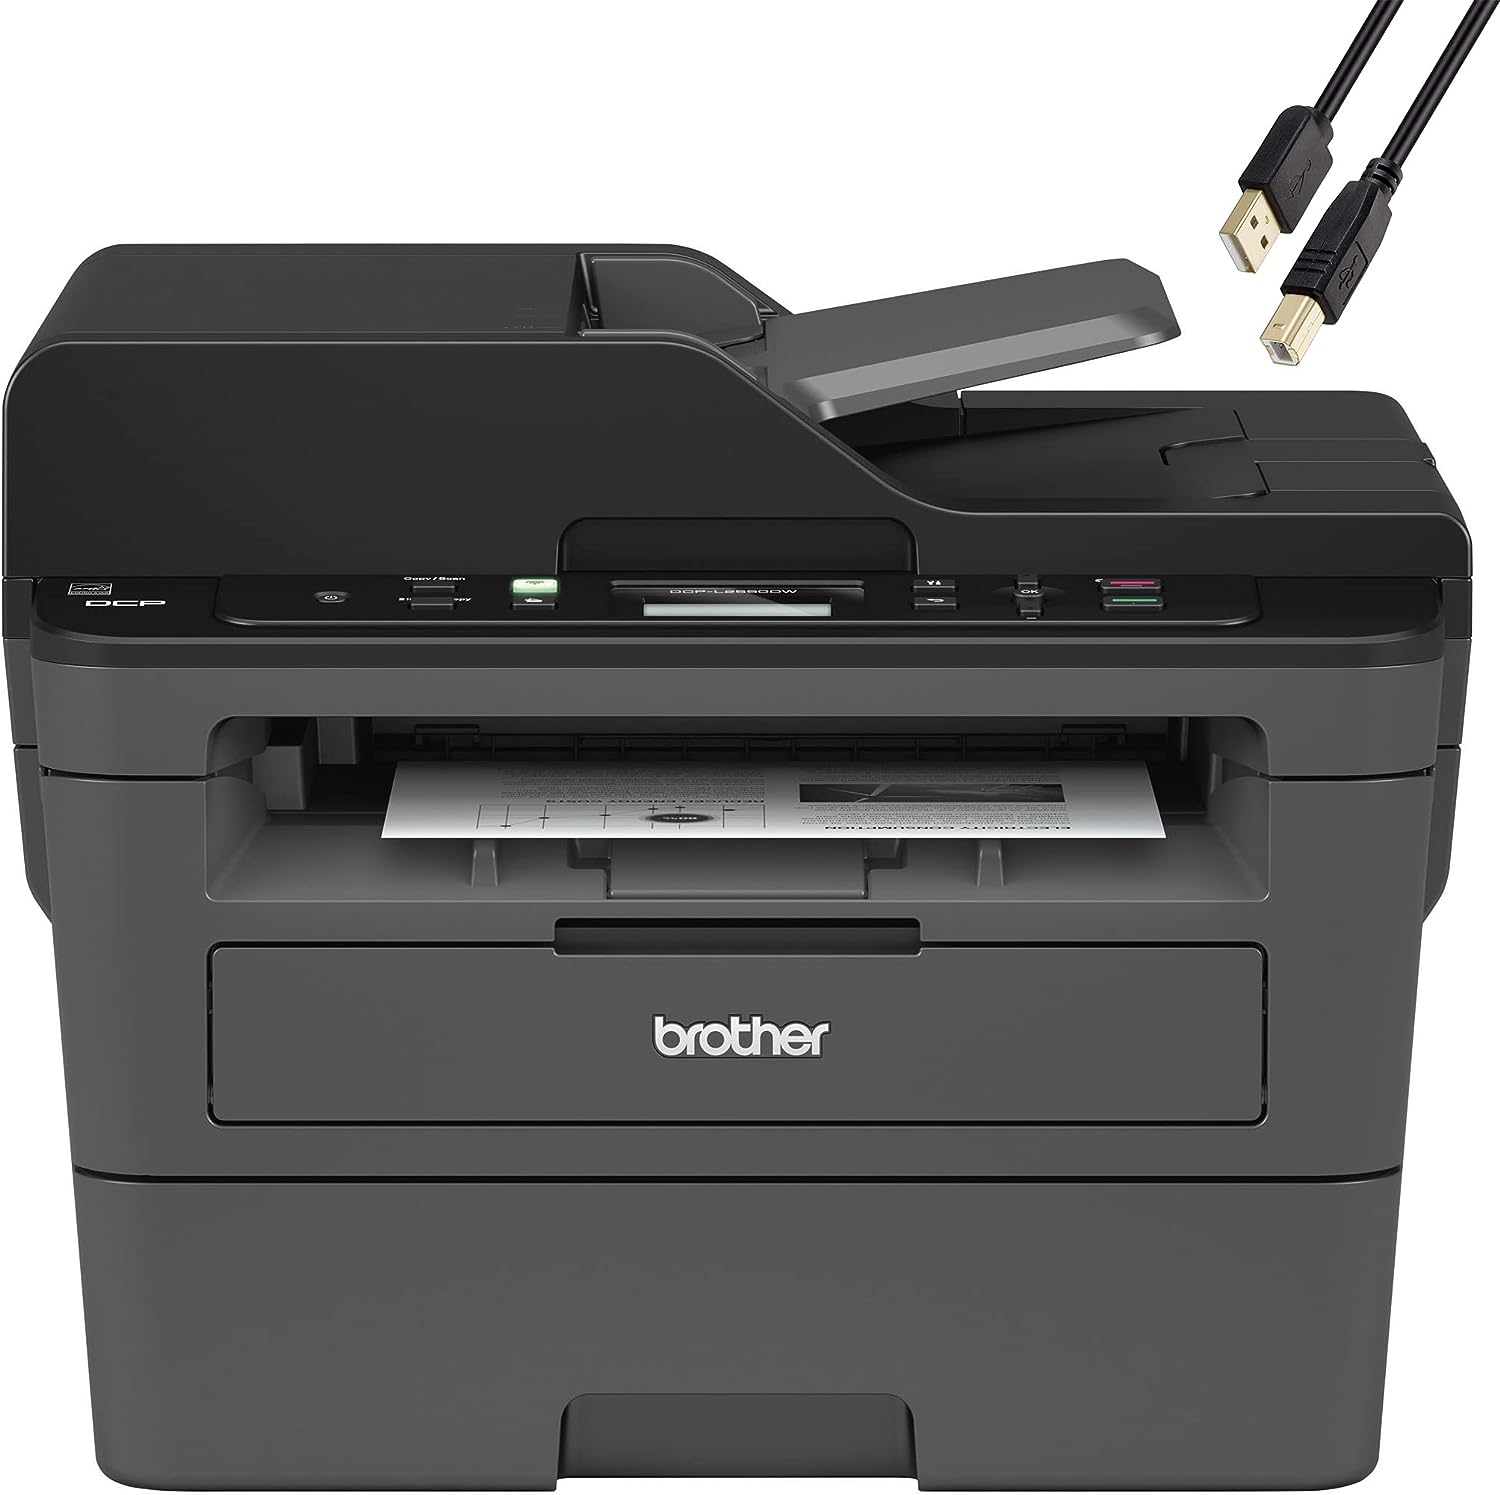 Brother DCP-L2550DWA All-in-One Wireless Monochrome Laser Printer Review